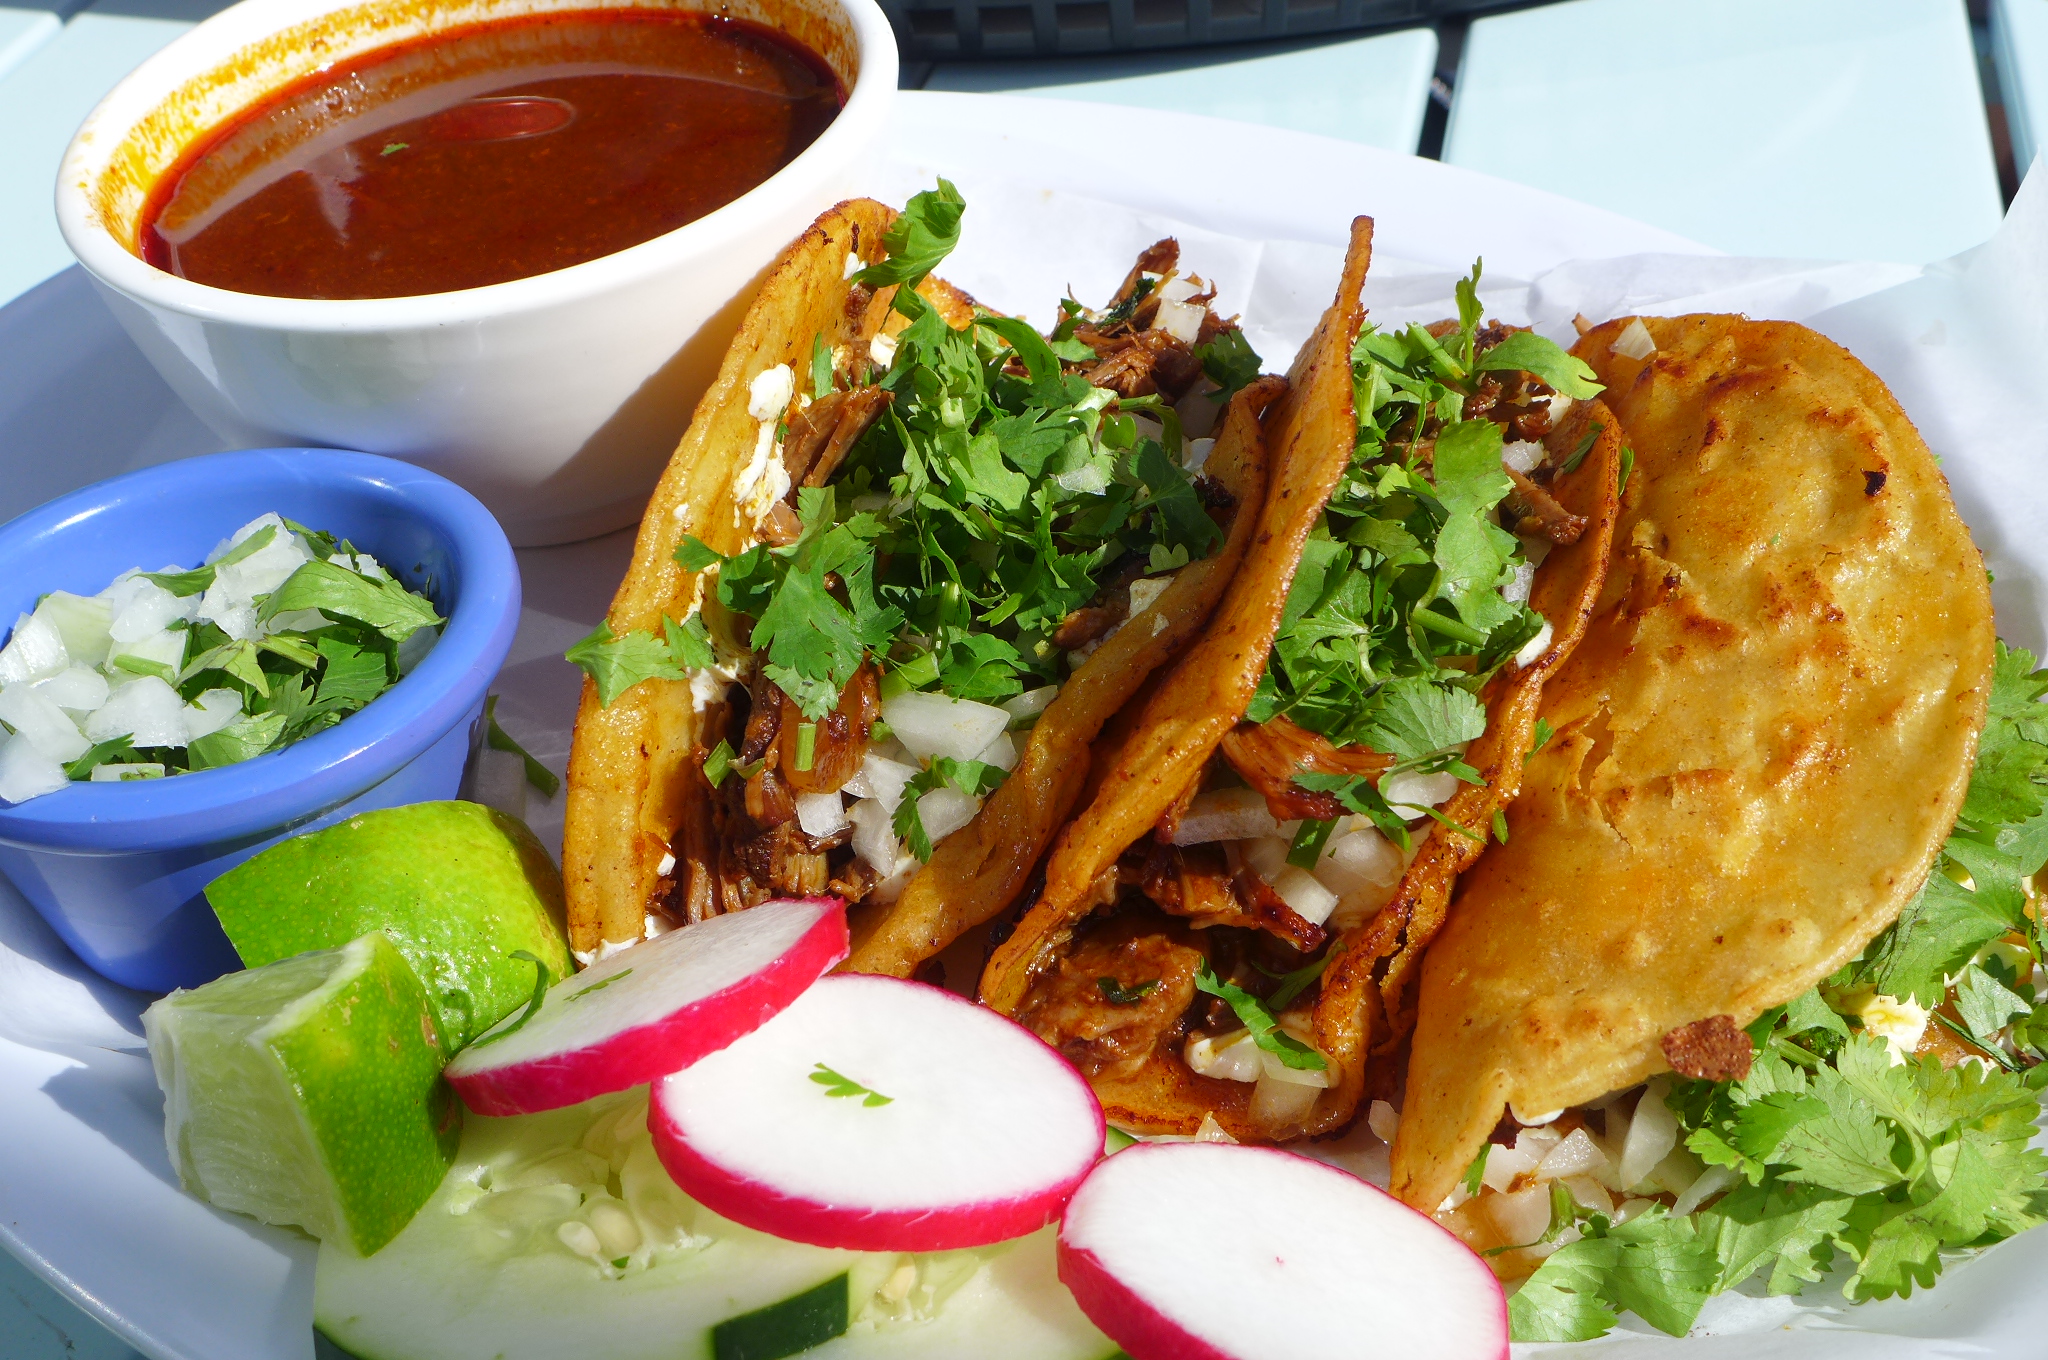 Three corn tortilla tacos with a dark soup on the side and garnished with bright red radish slices in foreground.